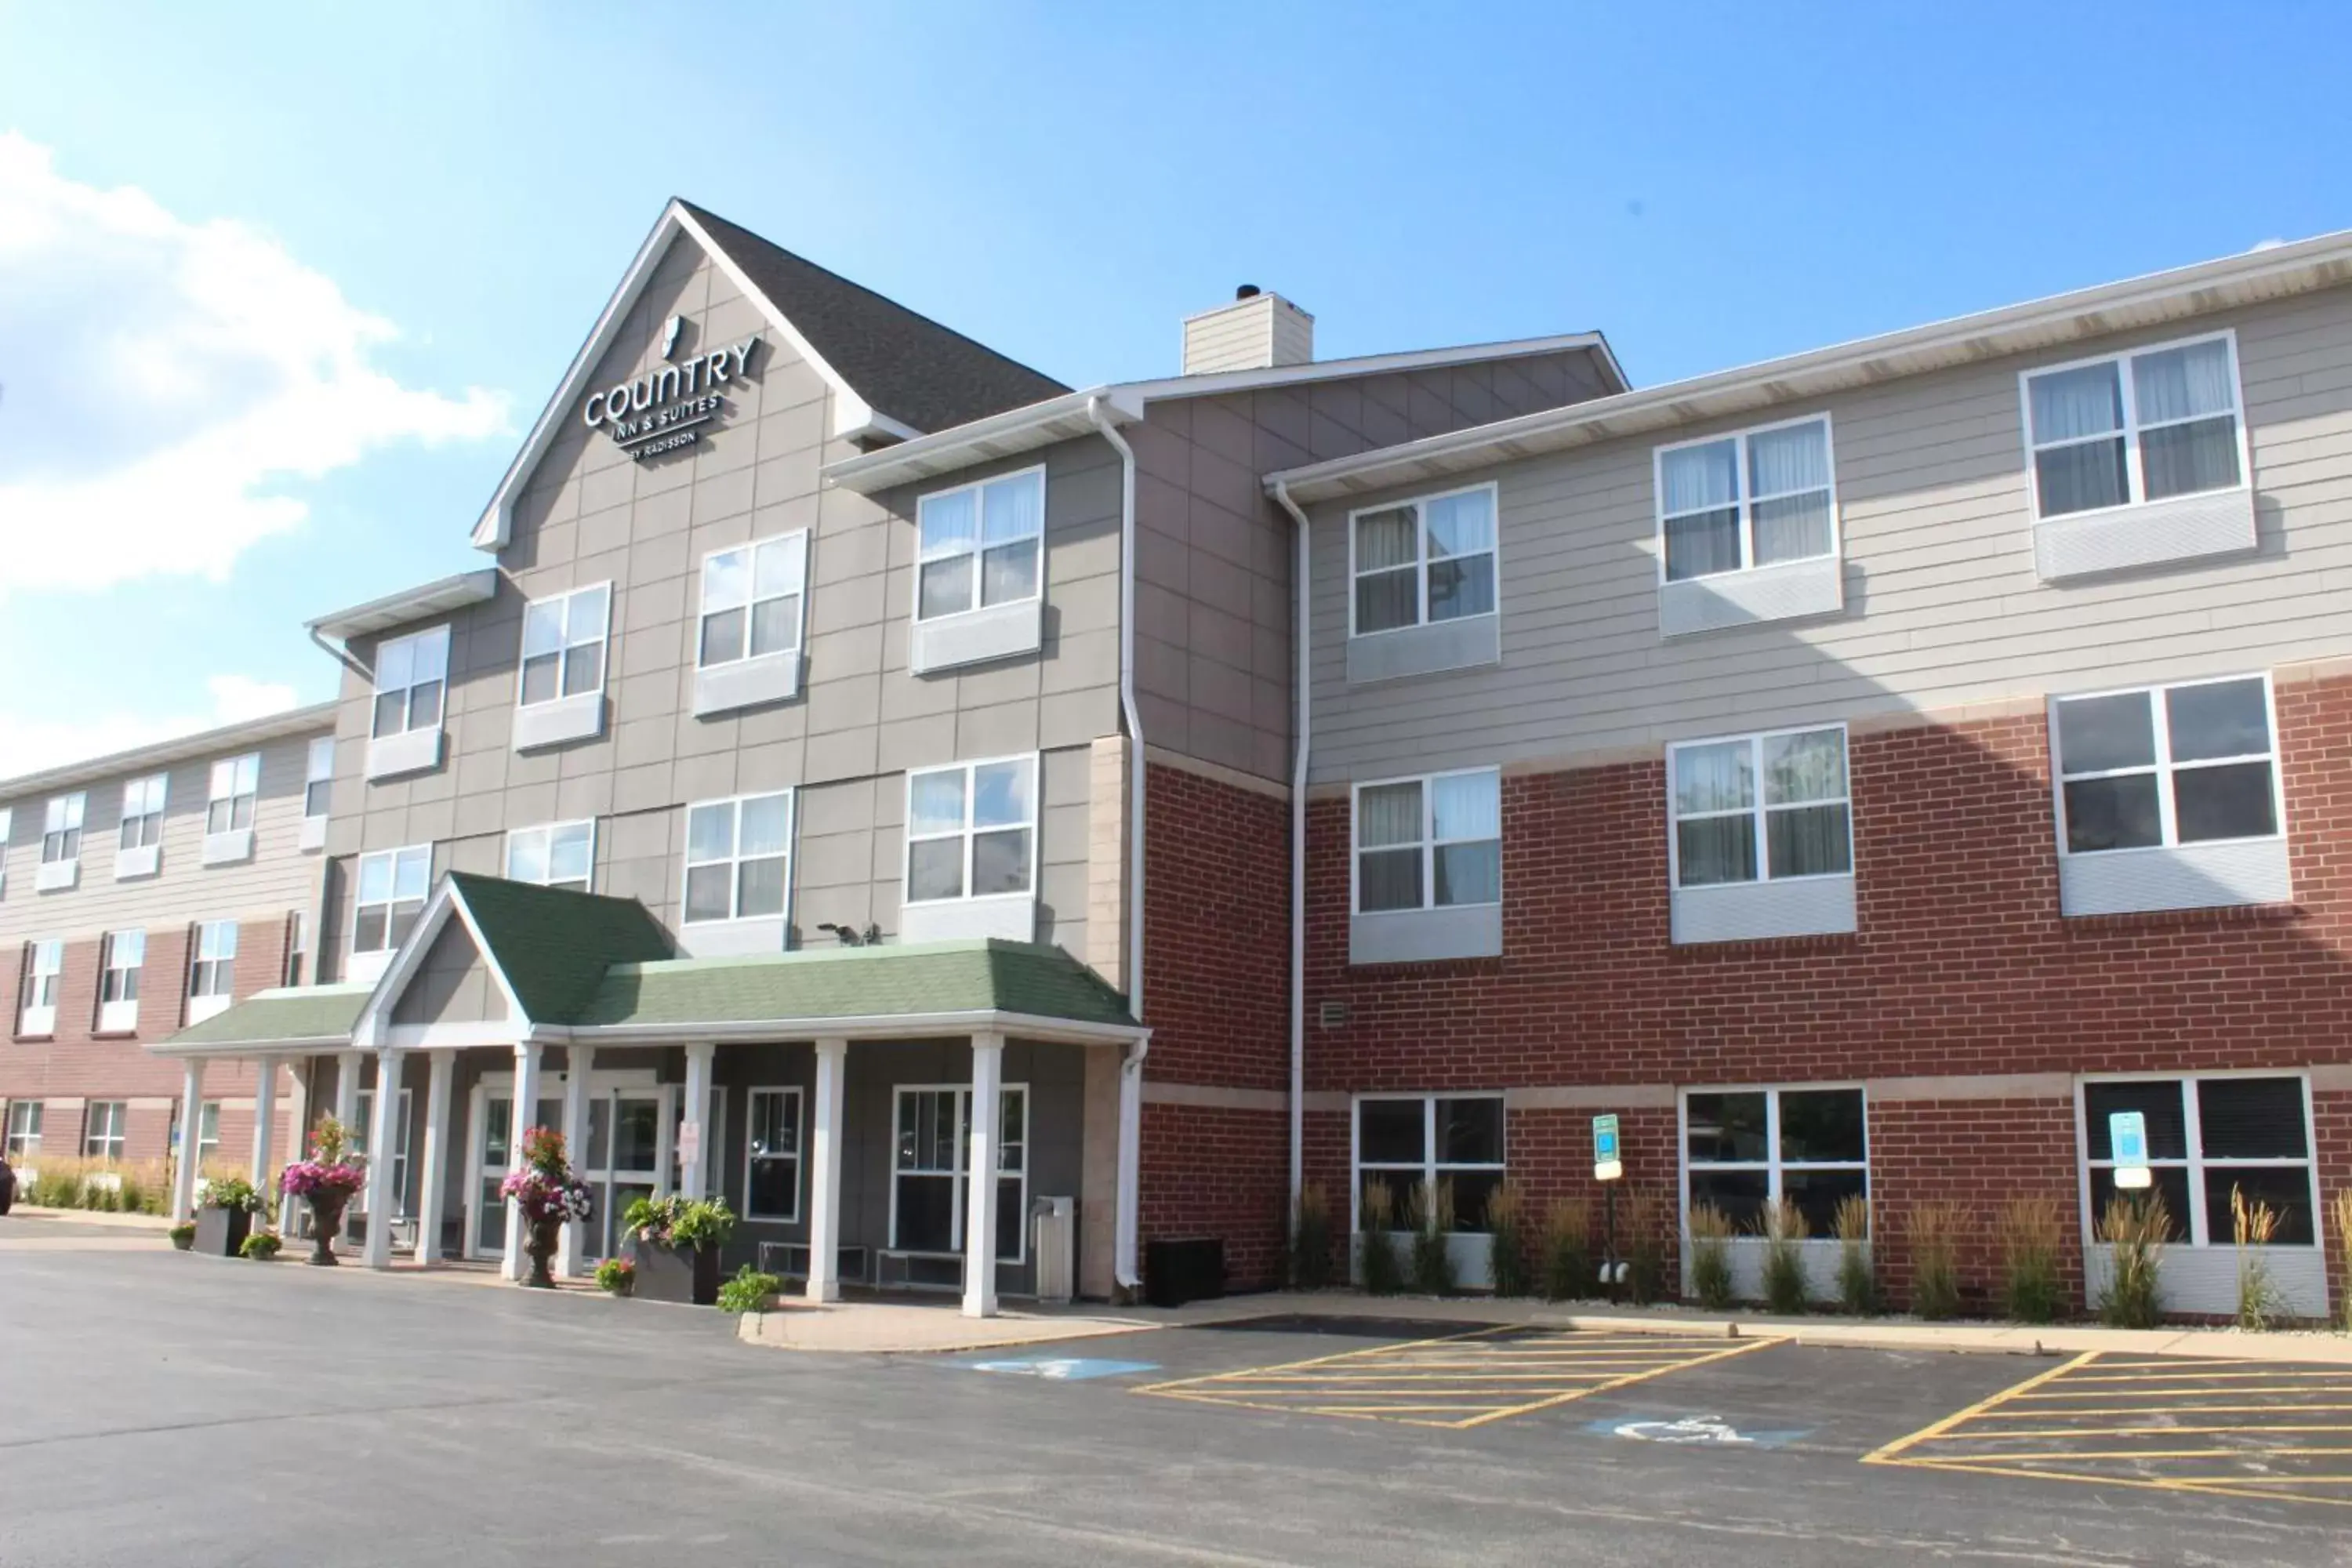 Property Building in Country Inn & Suites by Radisson, Crystal Lake, IL